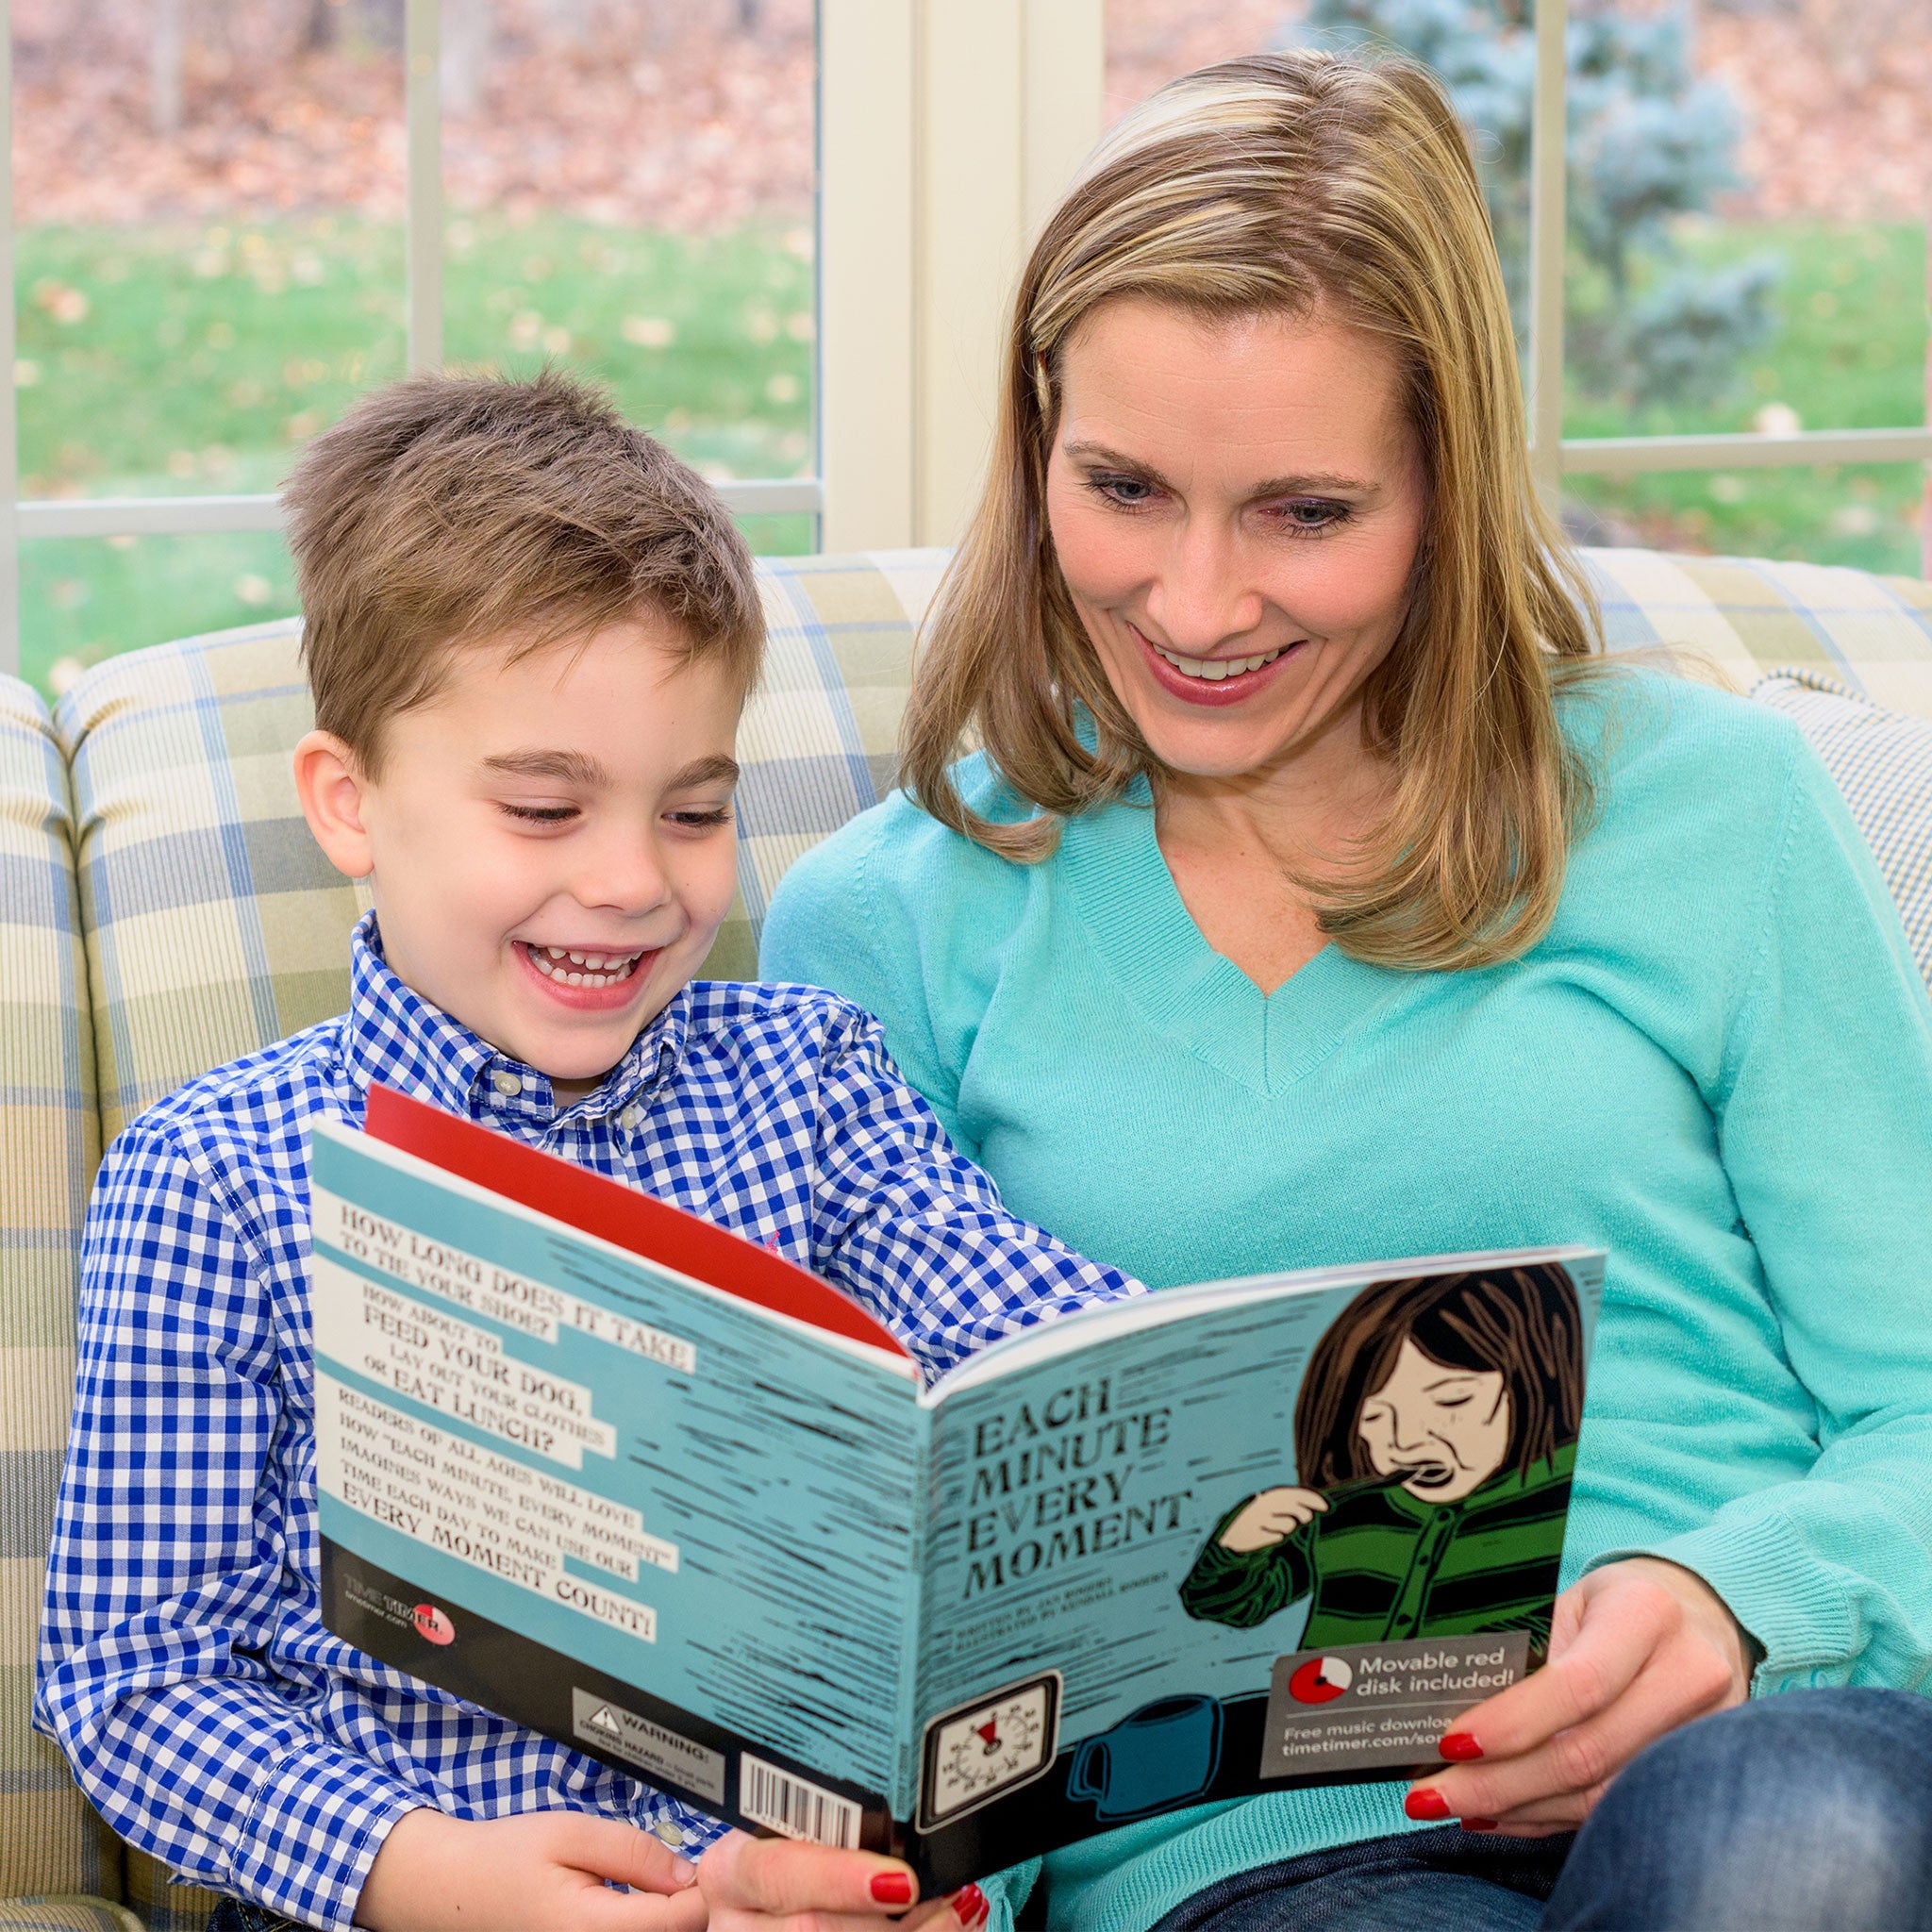 Each Minute, Every Moment book being read by mother and son